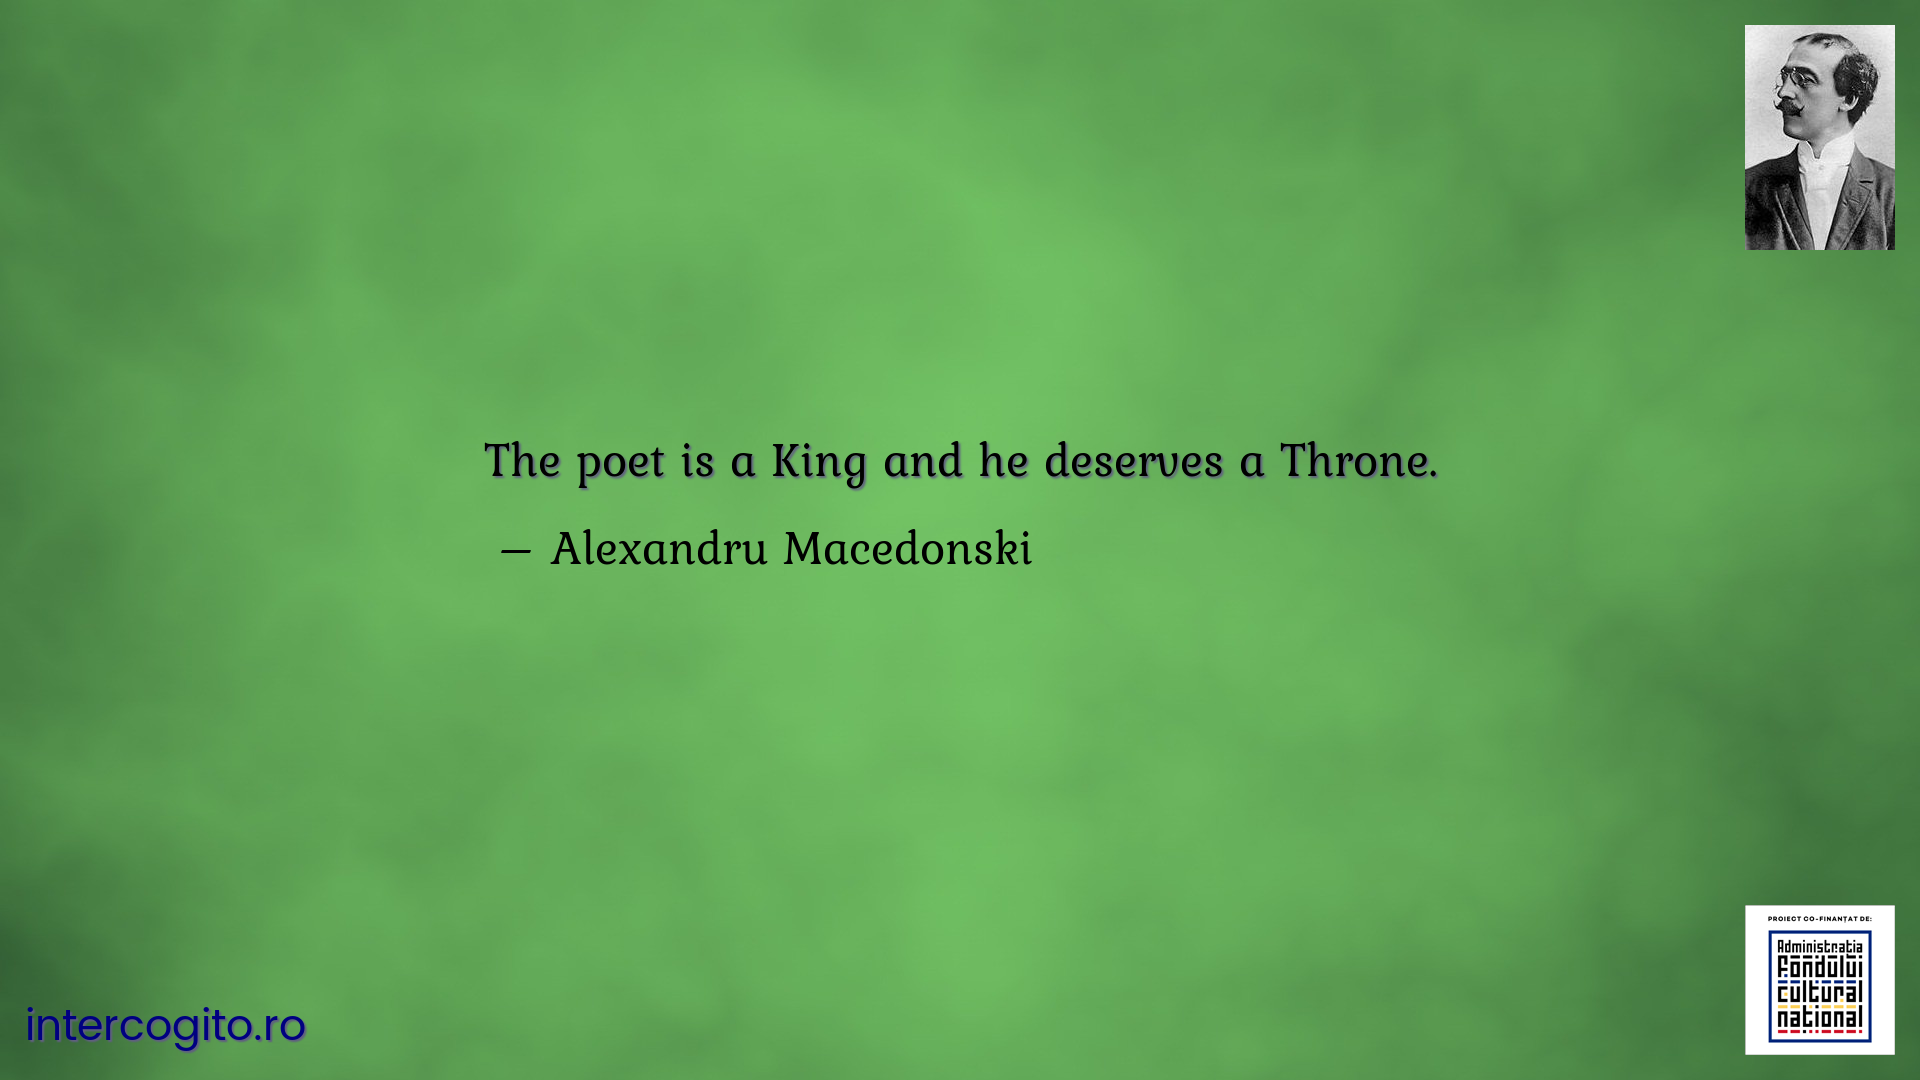 The poet is a King and he deserves a Throne.